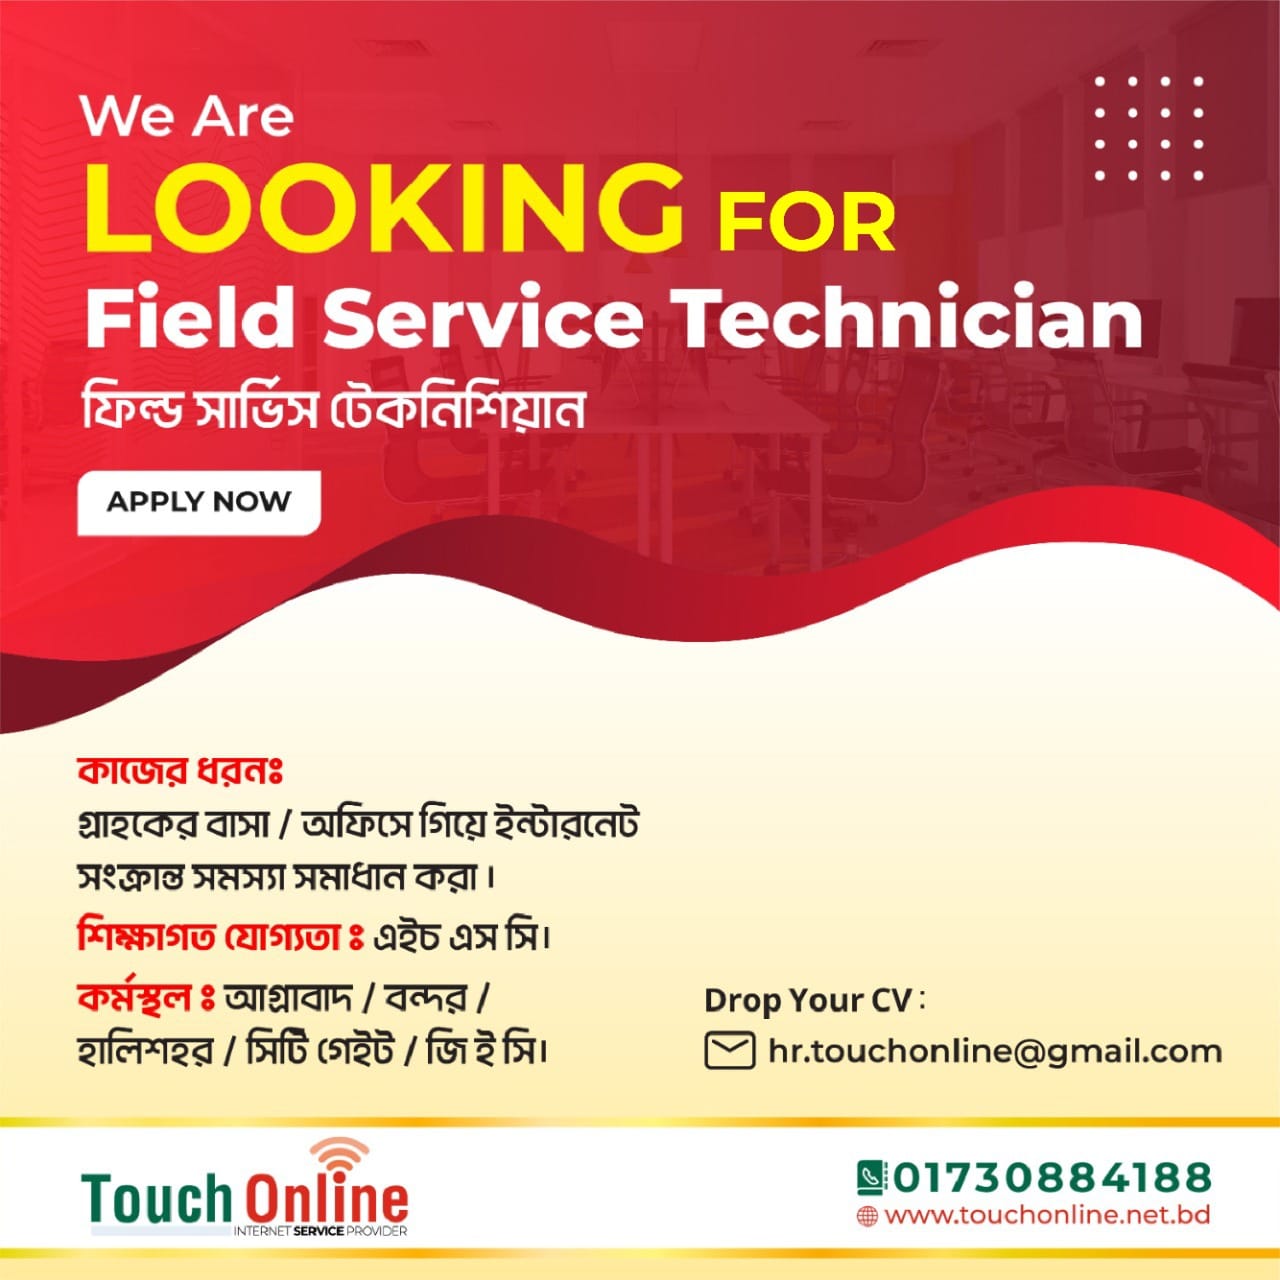 touch_online_best_internet_service_provider_(isp)_in_halishahar_chittagong_looking_for_field_service_technician